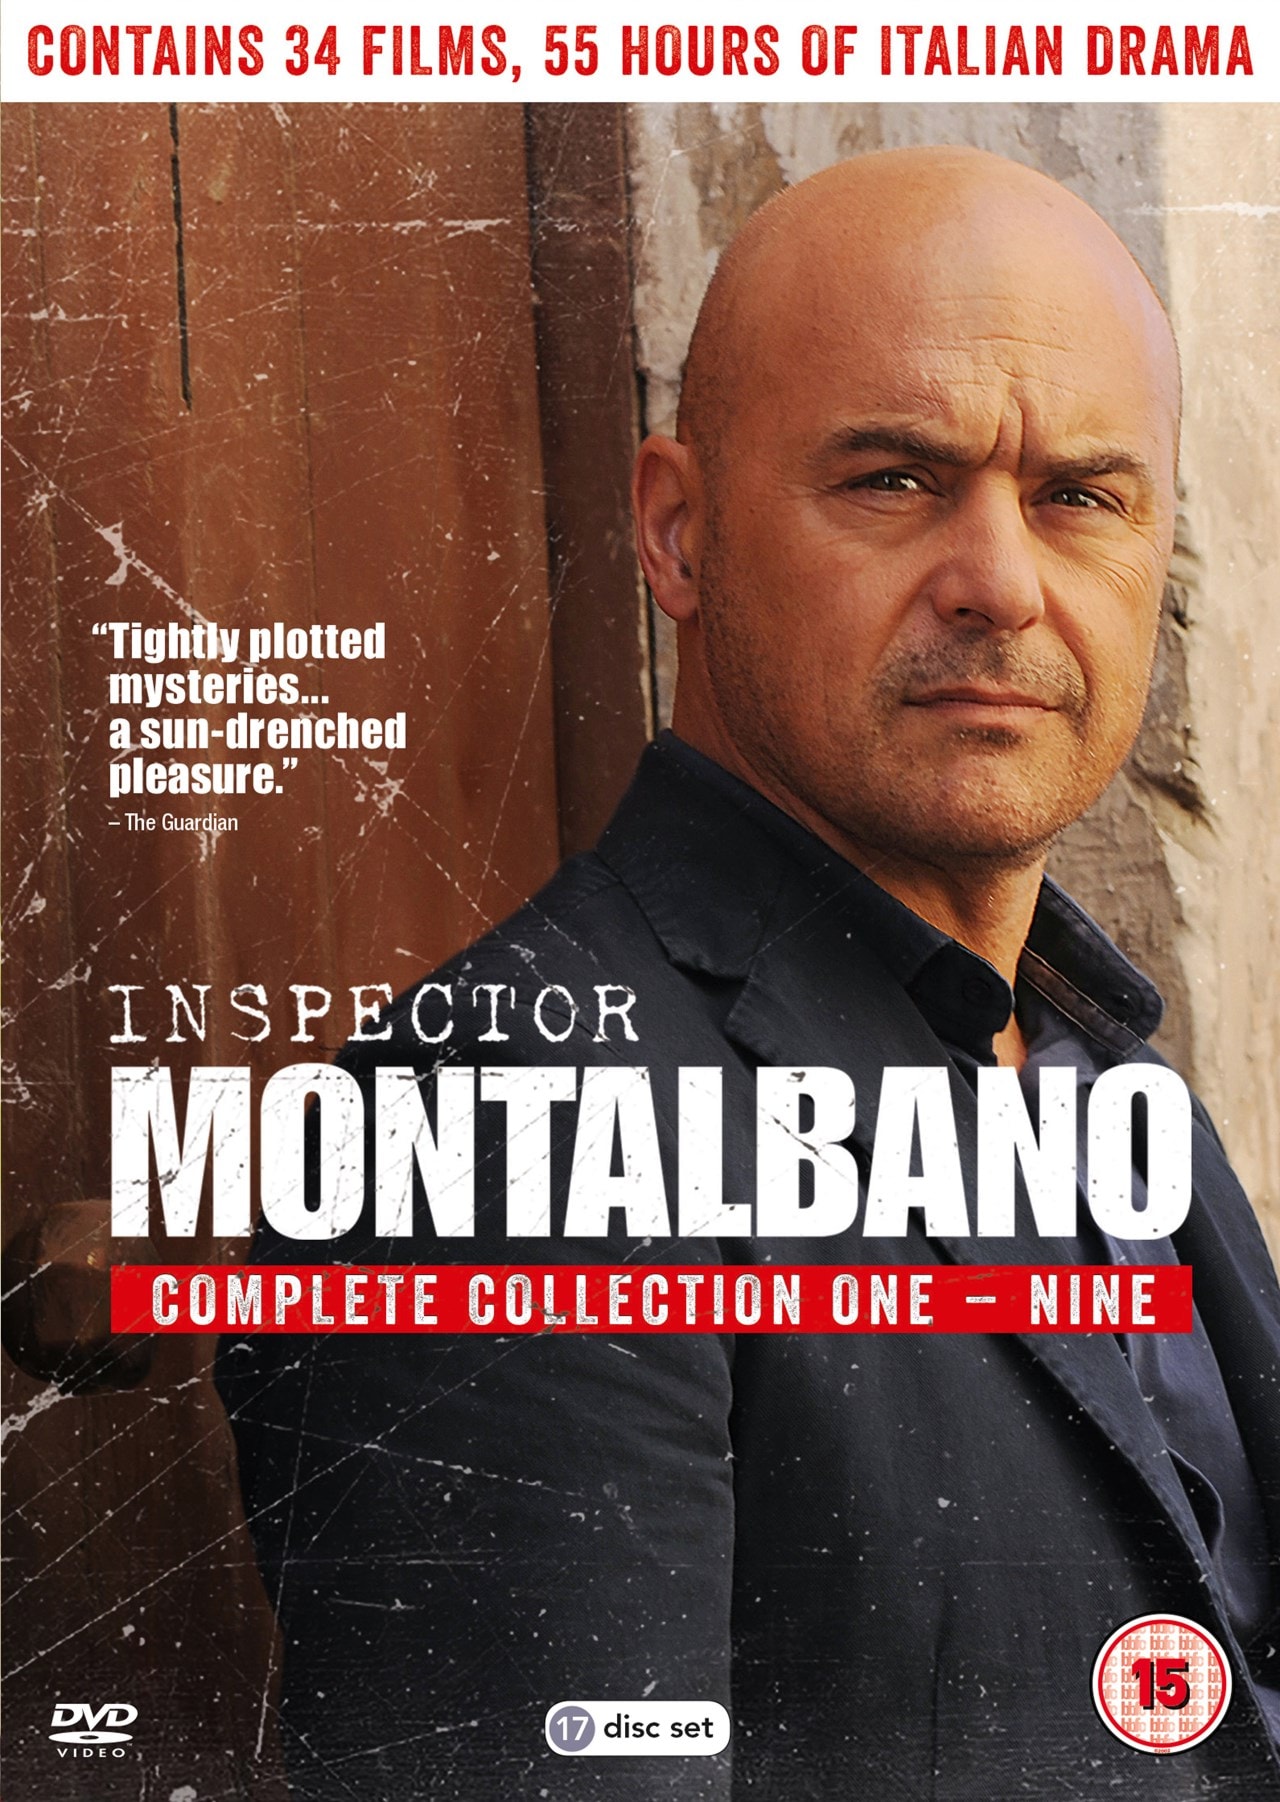 Inspector Montalbano Complete Collection 1 9 Dvd Box Set Free Shipping Over Hmv Store